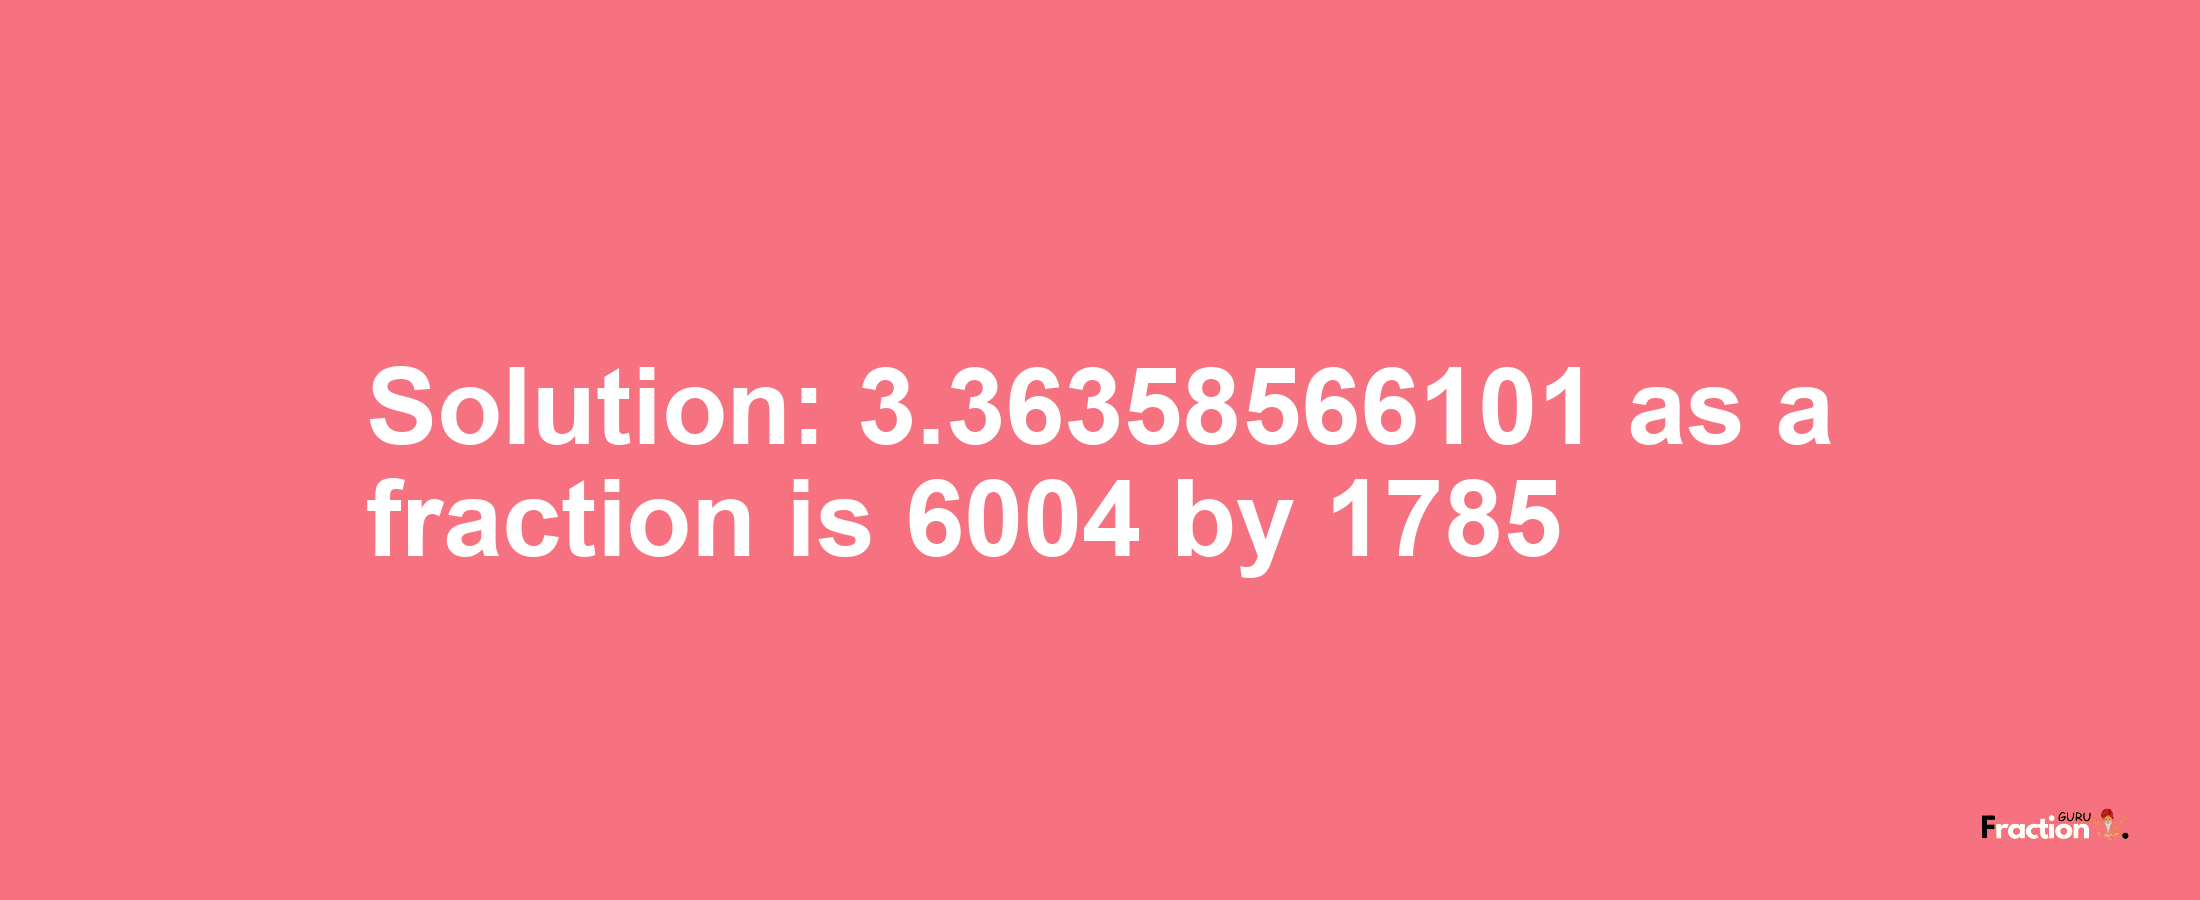 Solution:3.36358566101 as a fraction is 6004/1785